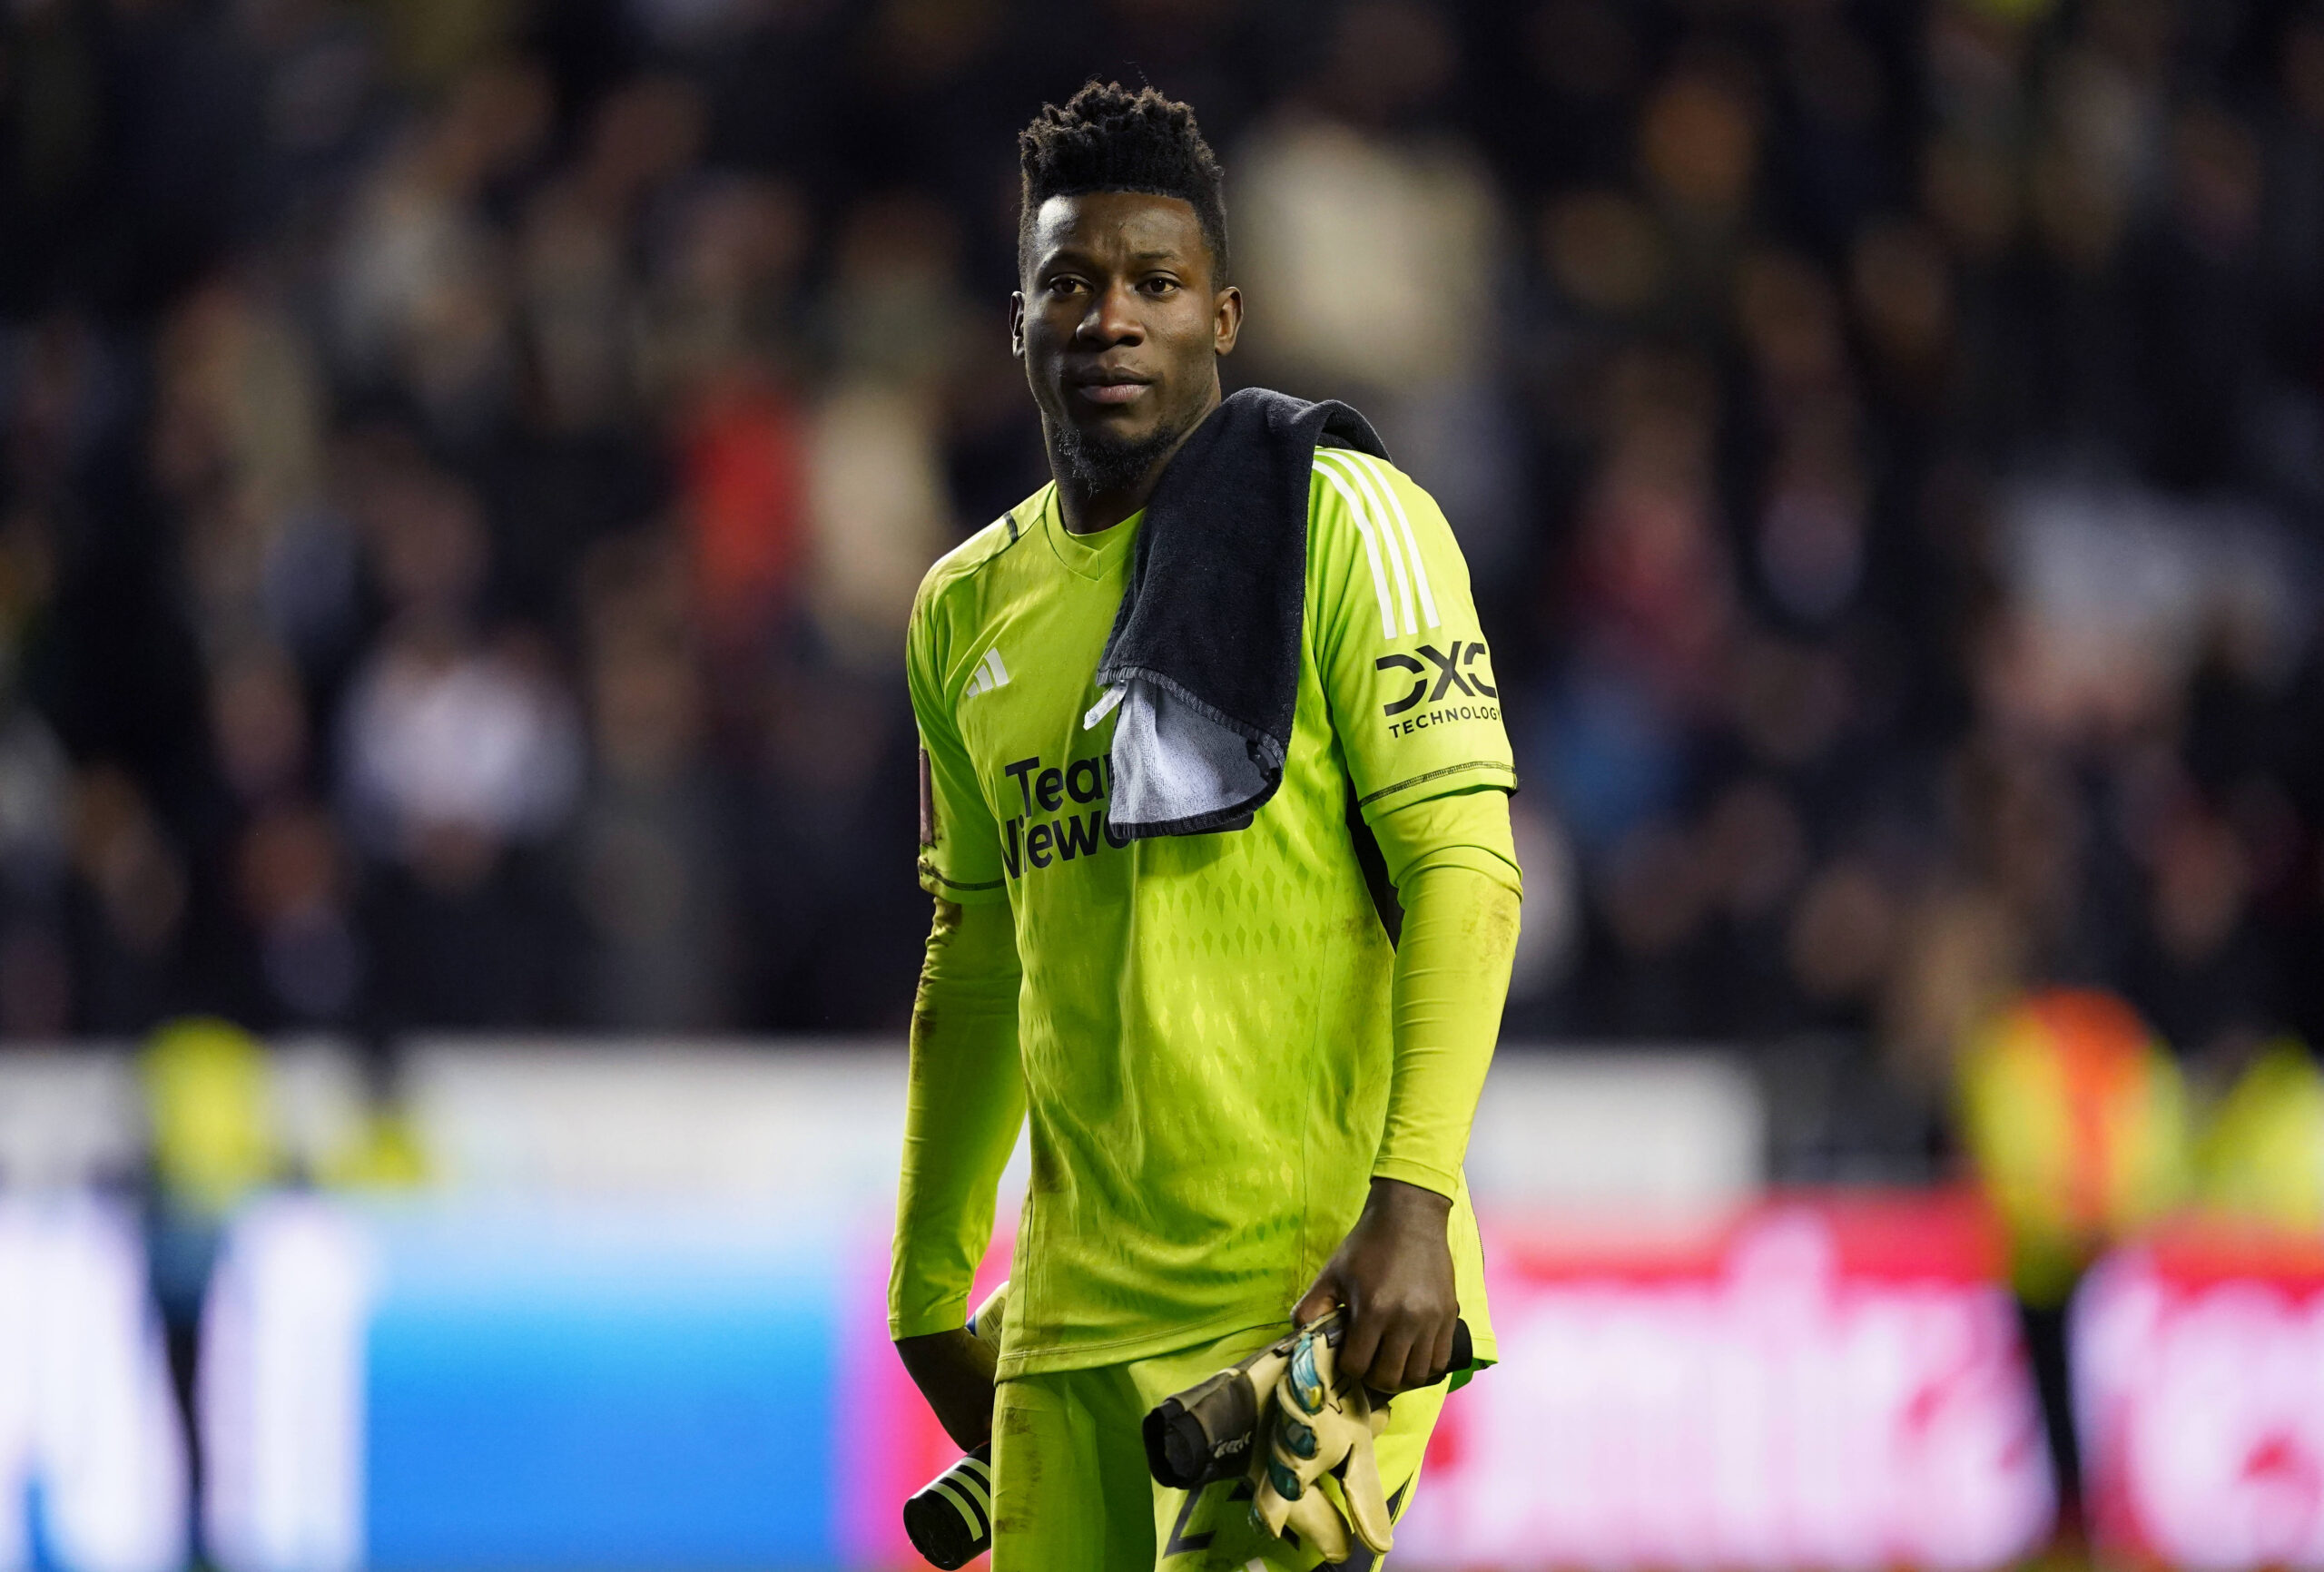 Manchester United's Andre Onana Delayed AFCON Trip Until After Tottenham Hotspur Match